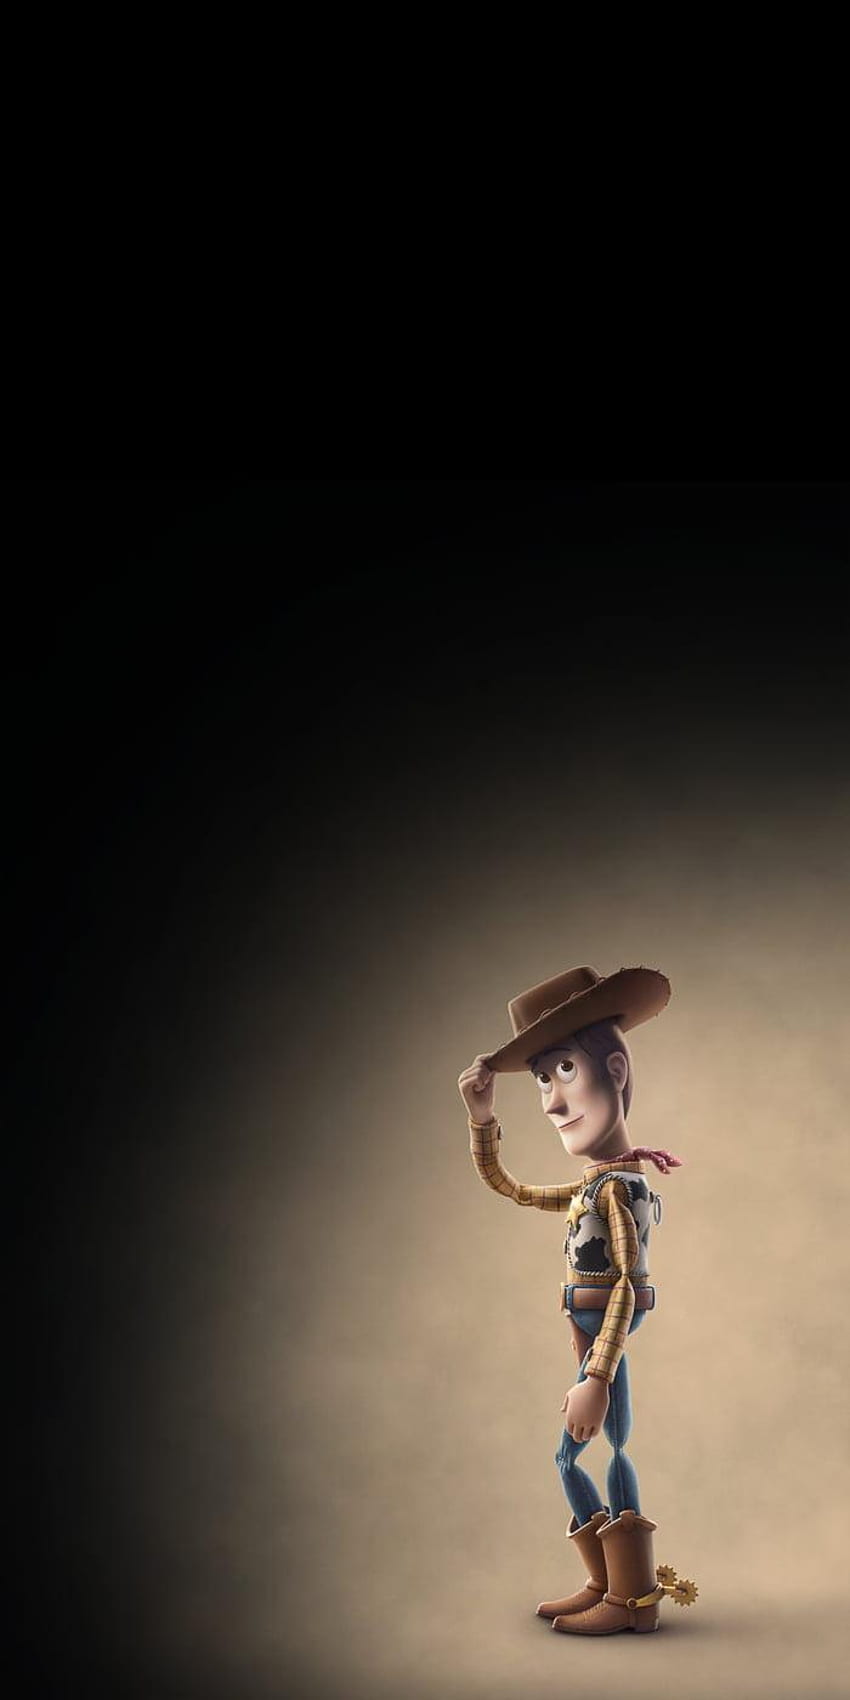 100+] Woody Wallpapers | Wallpapers.com